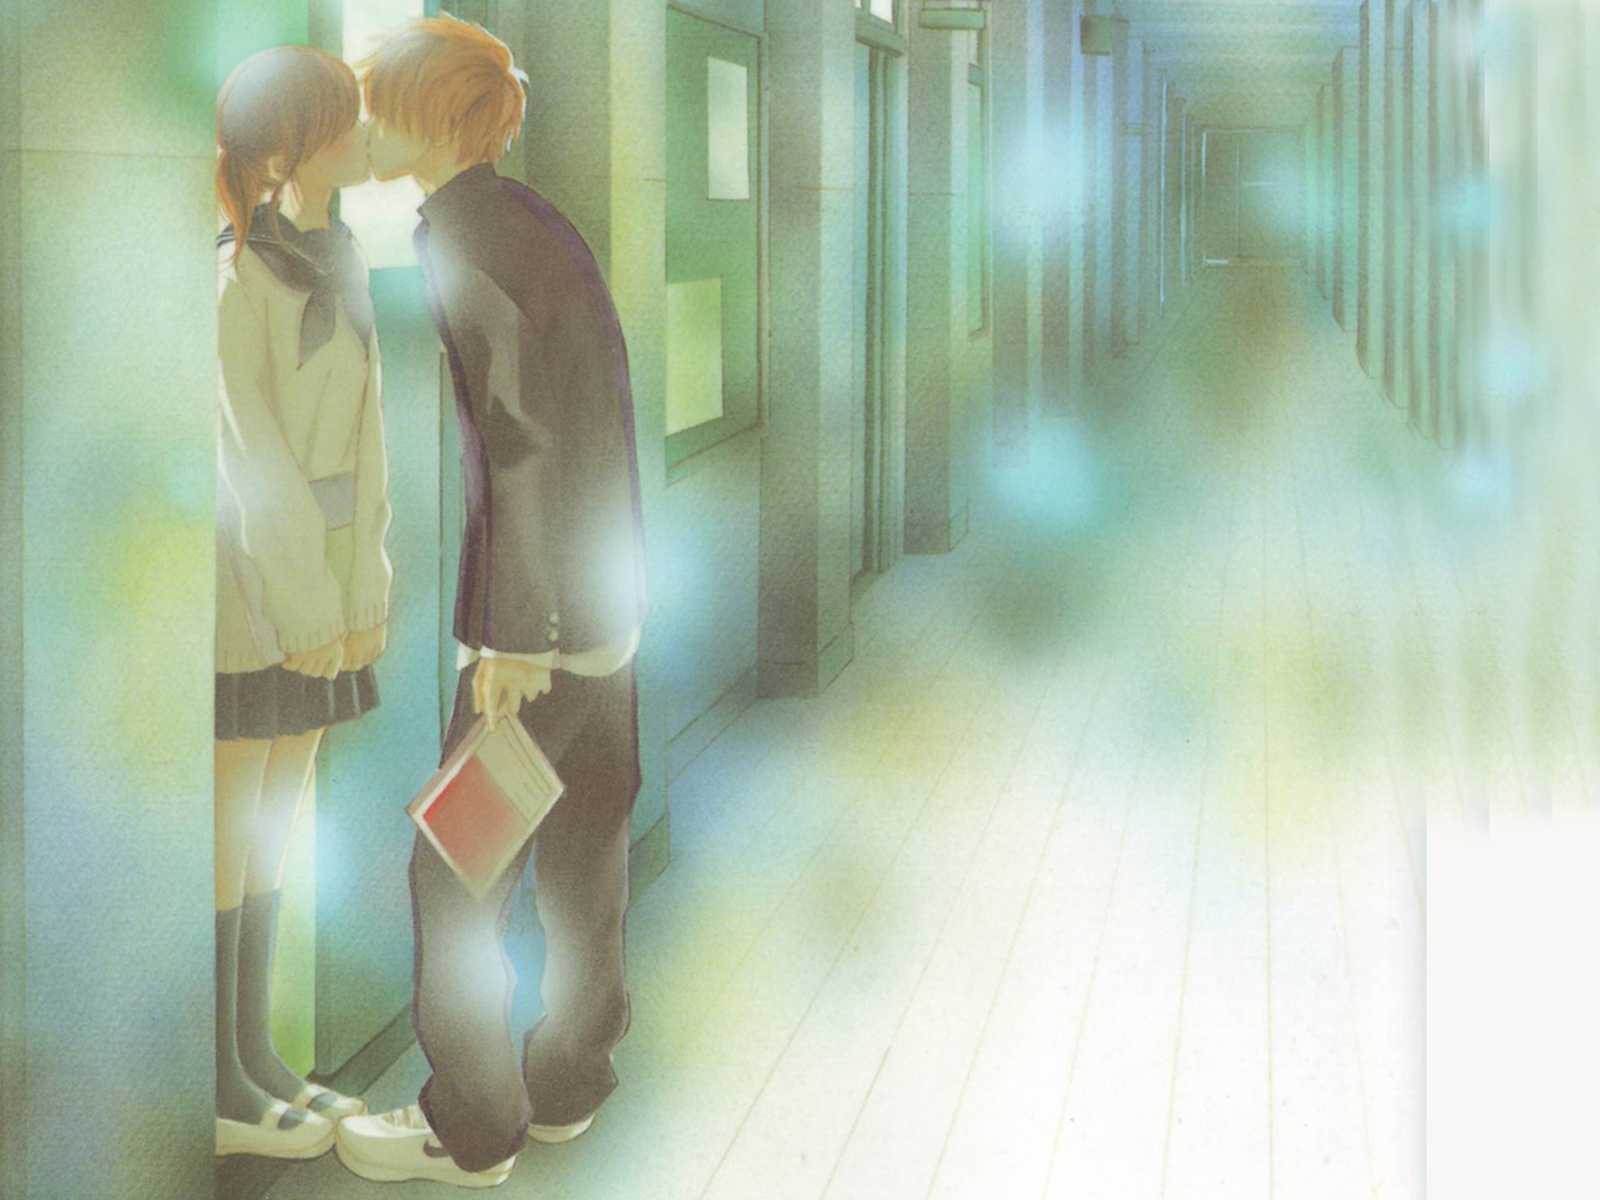 Young man and woman embrace each other, wearing casual clothes. They seem deep in conversation.